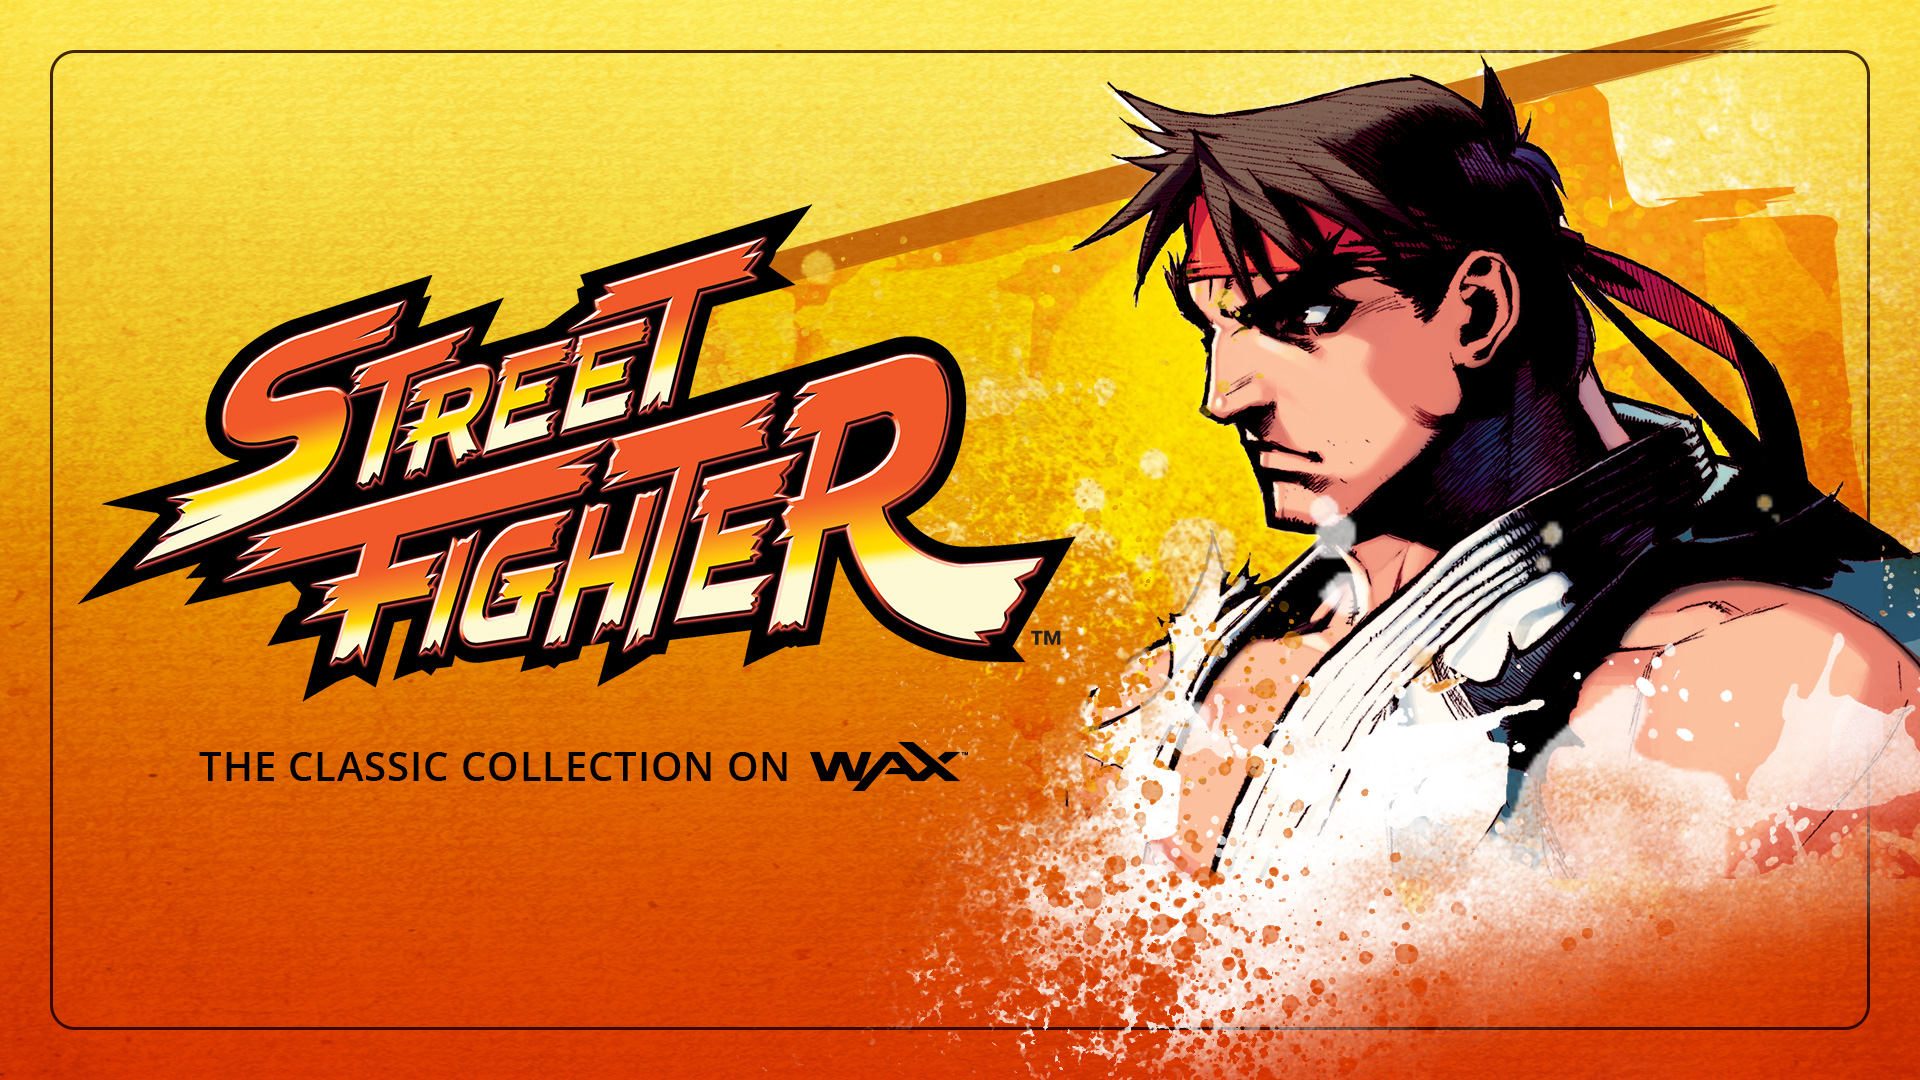 streetfighter.cards